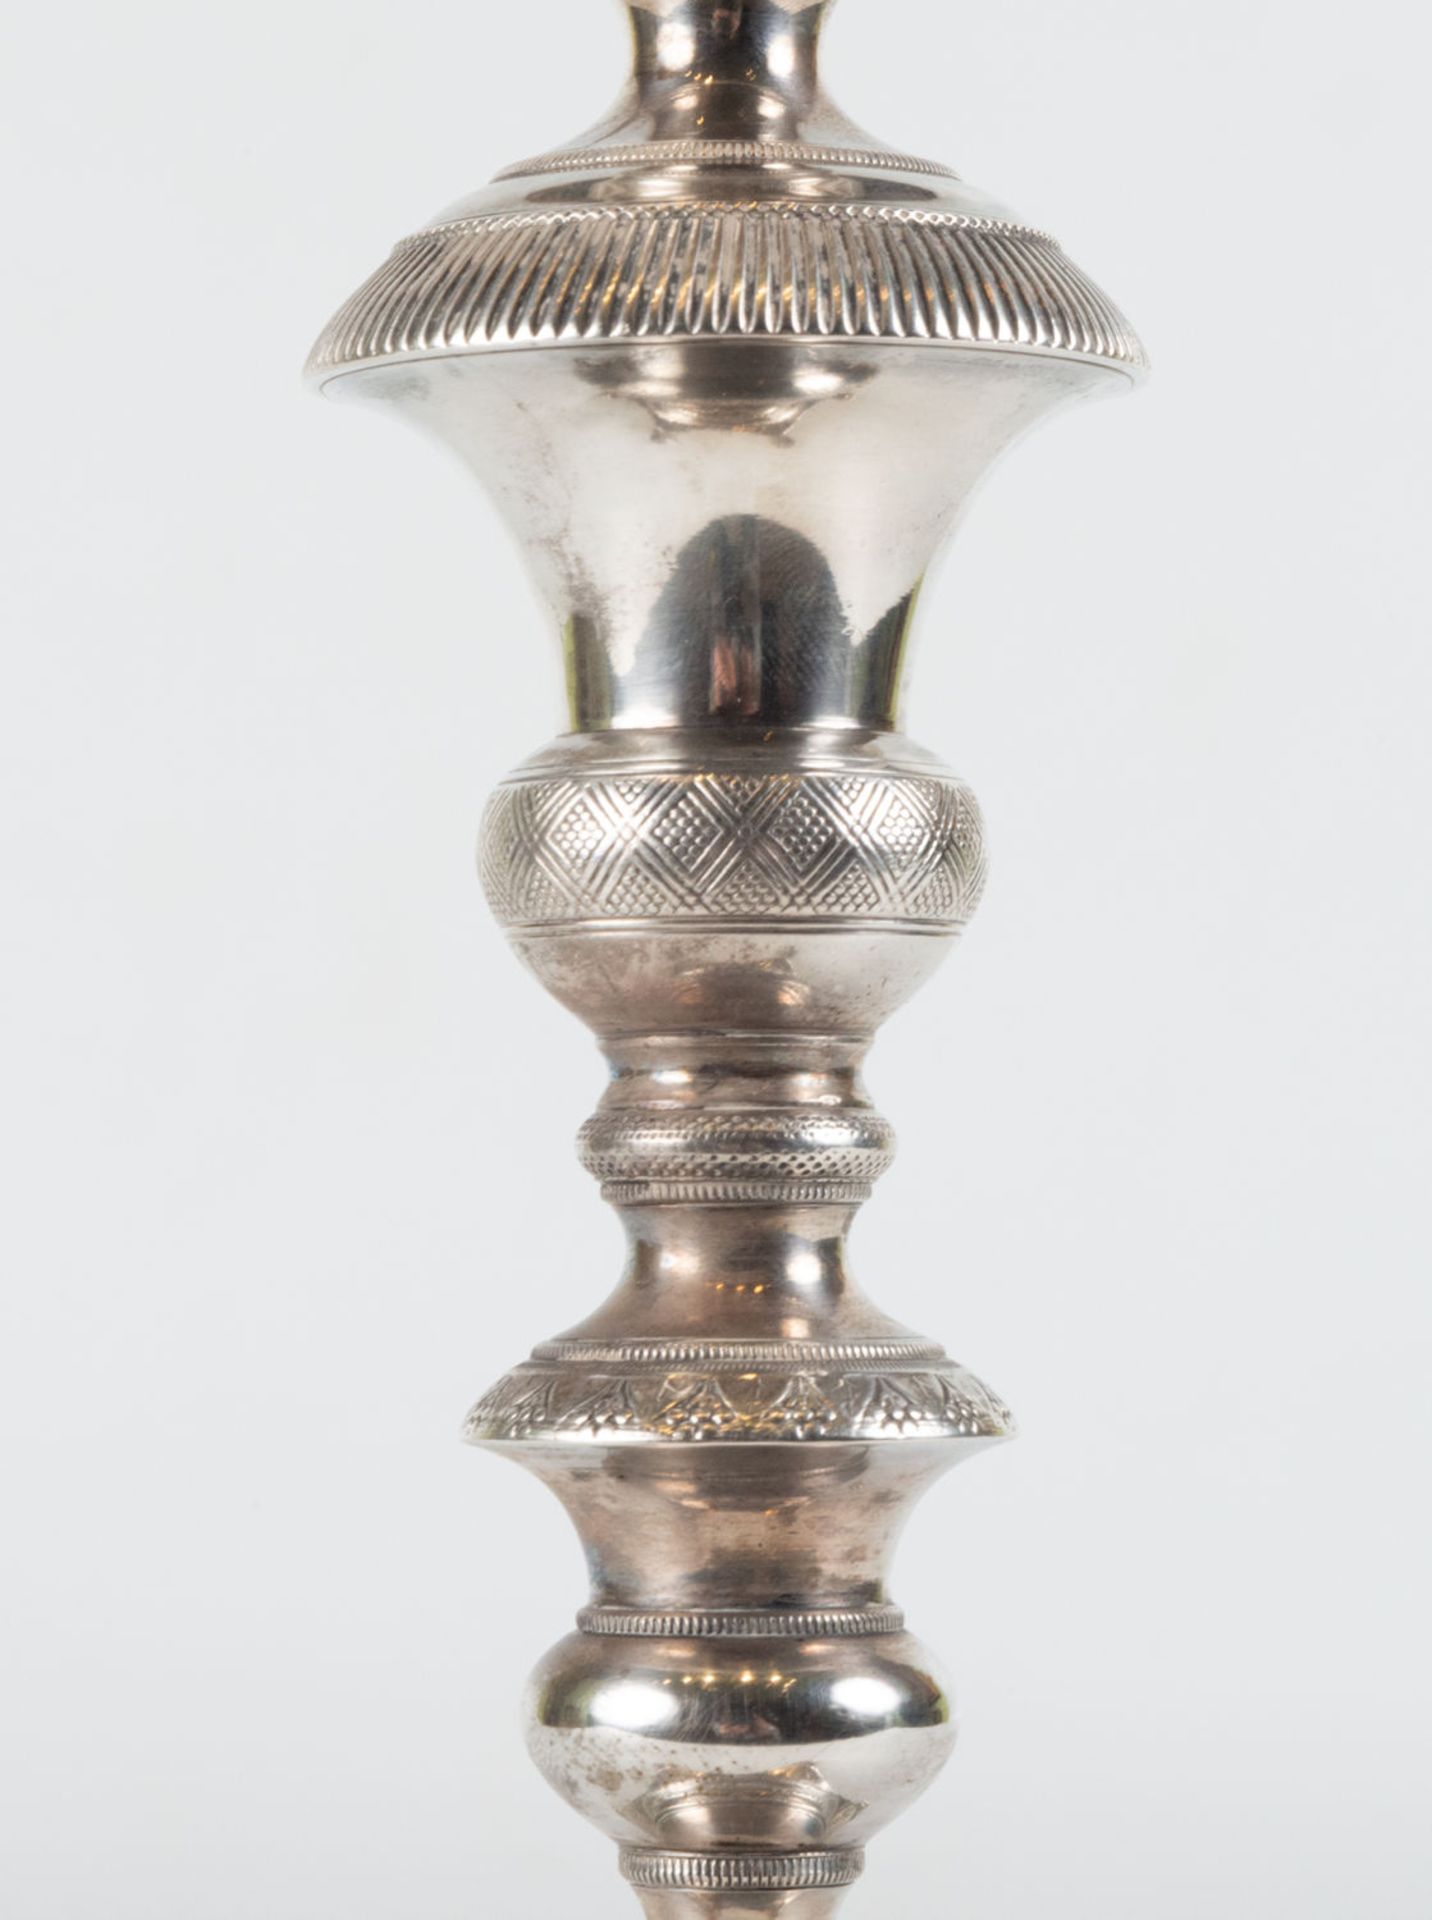 Pair of solid sterling silver candlesticks, 19th century - Image 9 of 9